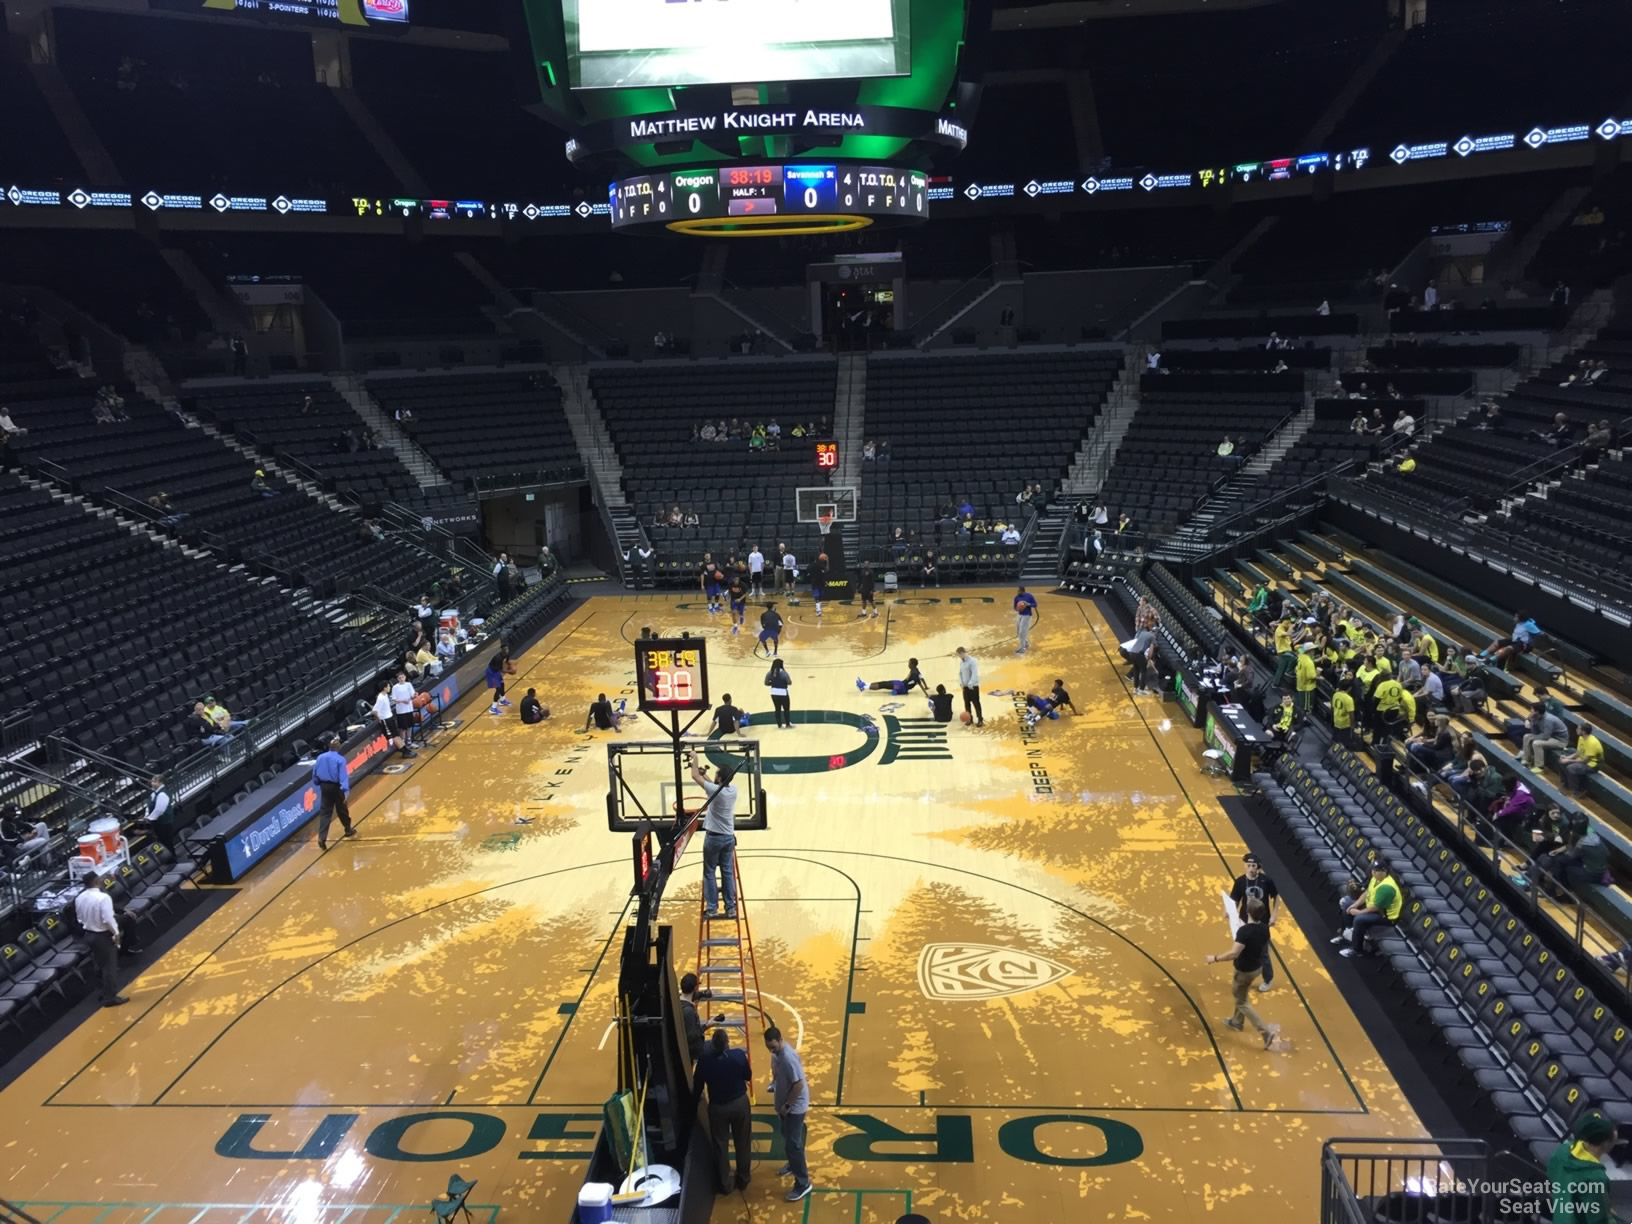 section 117, row ff seat view  - matthew knight arena